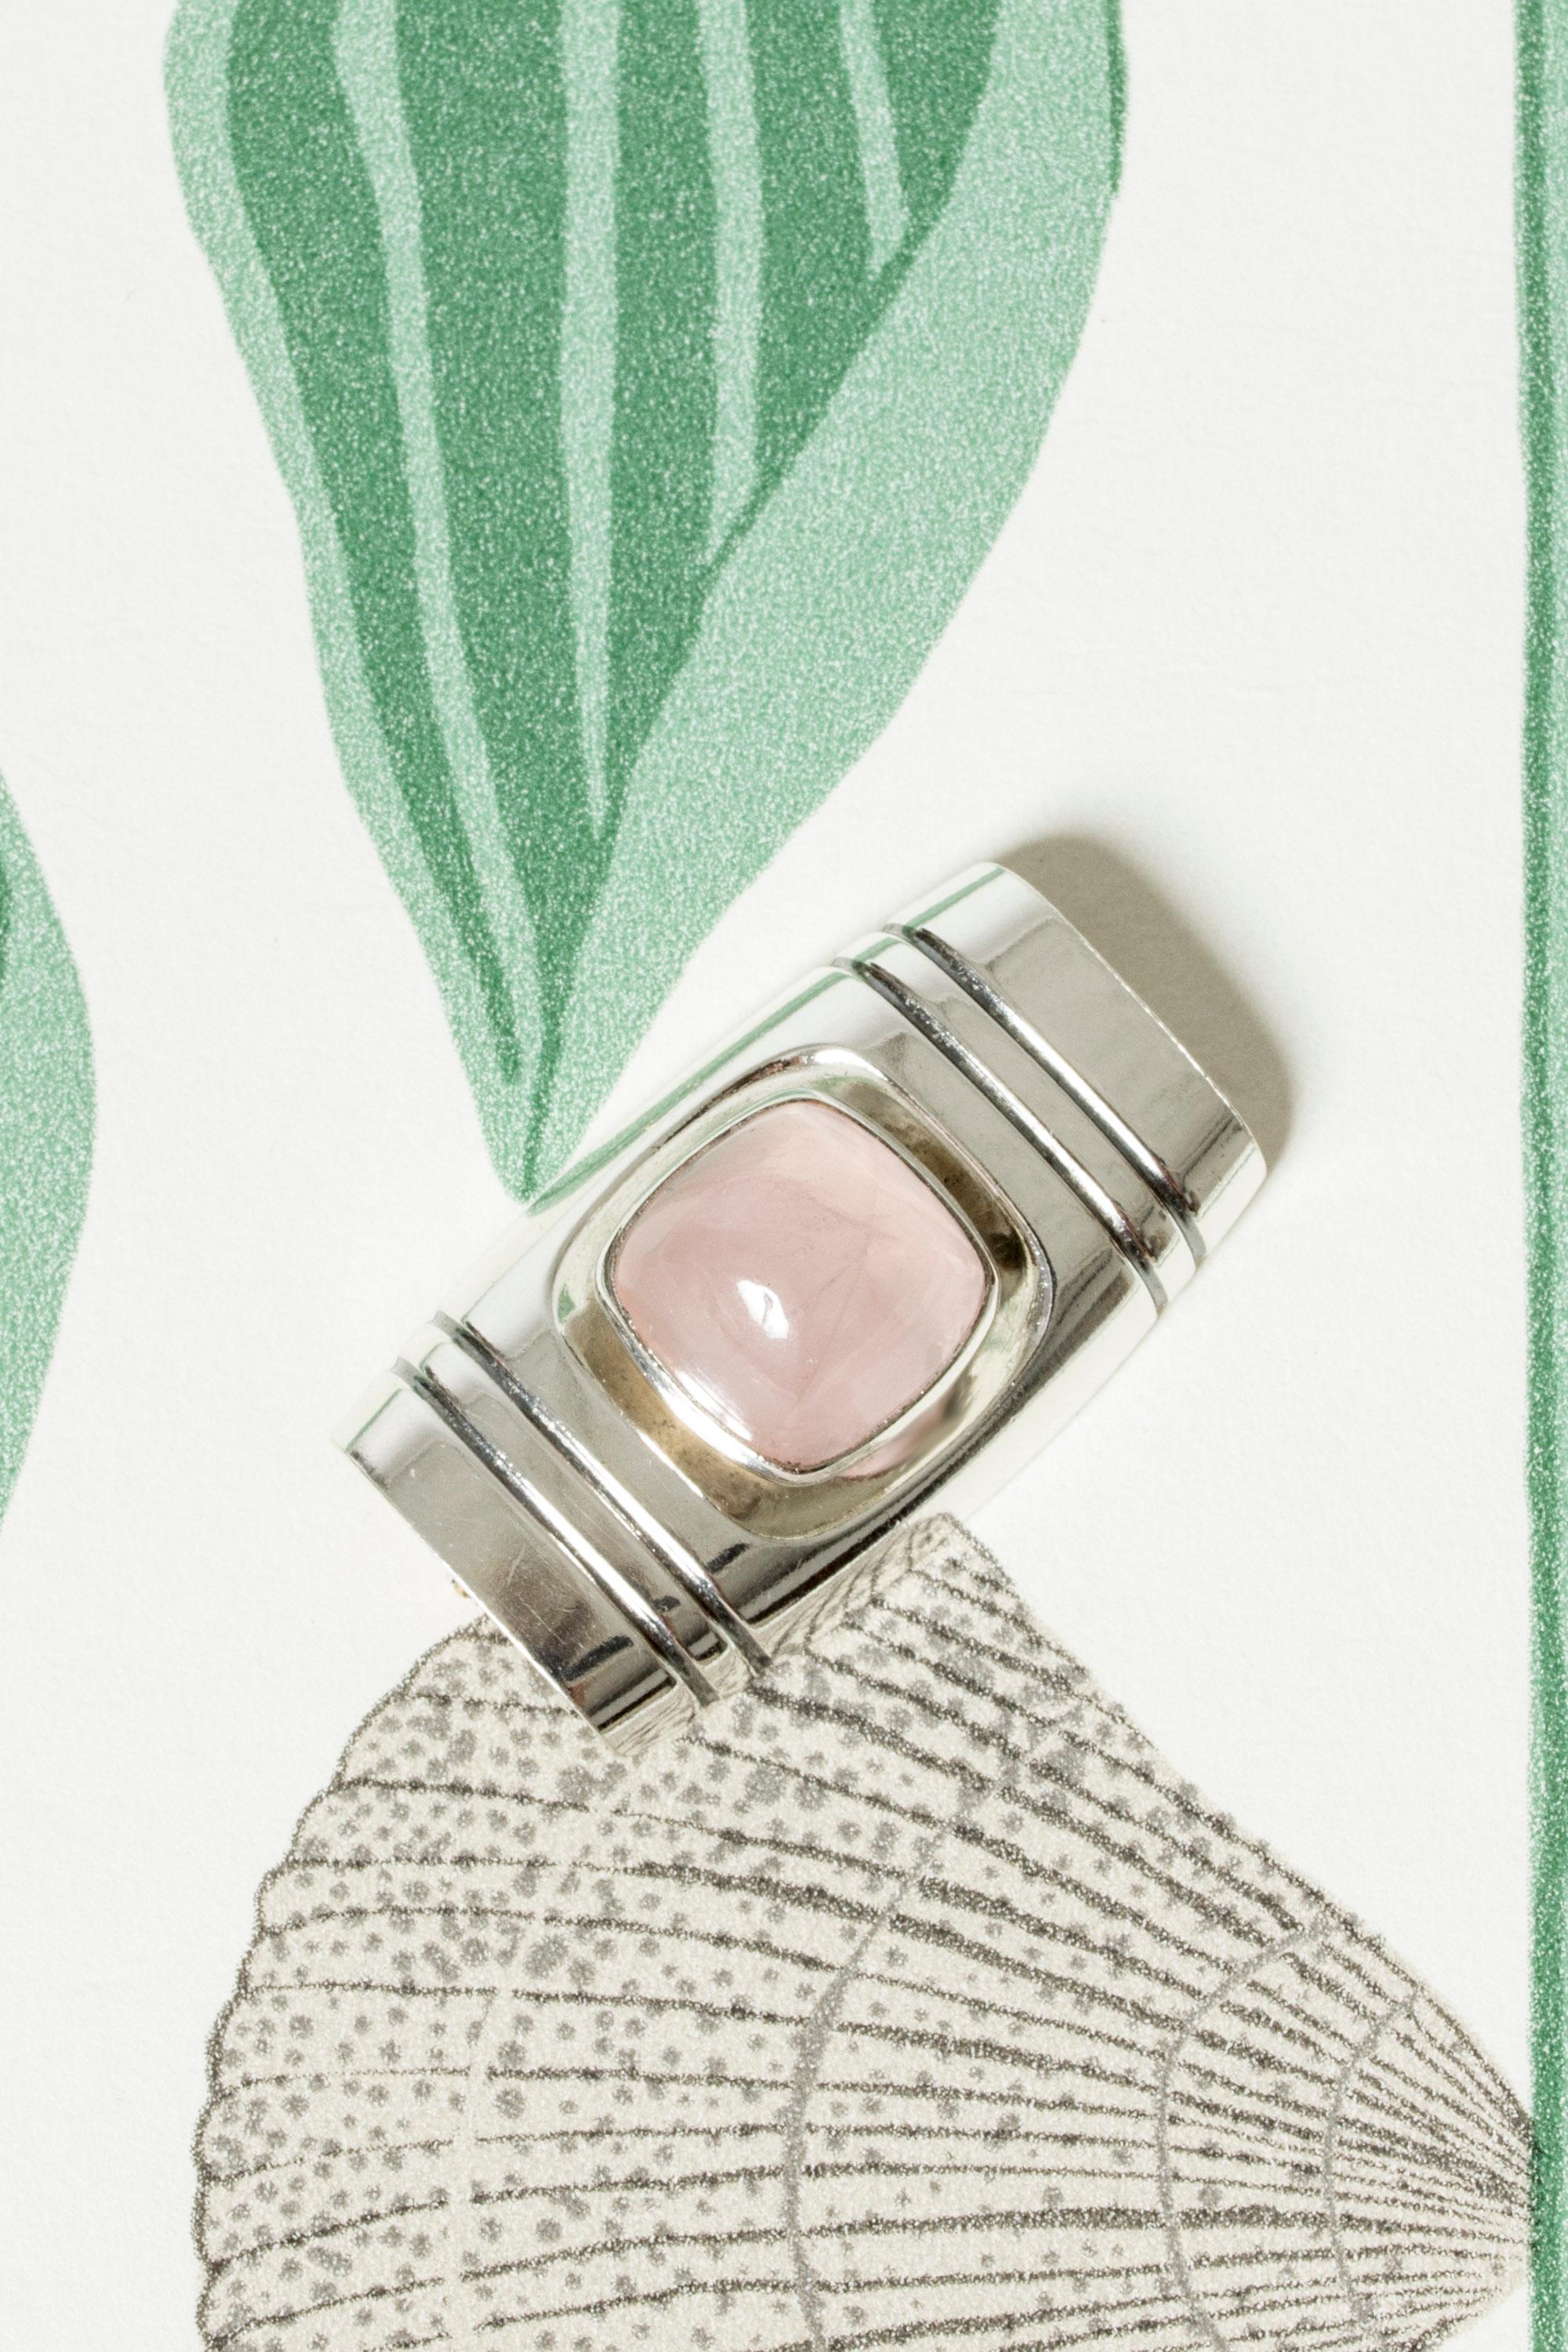 Lovely silver brooch by Elis Kauppi, in a rectangular form with a large rose quartz stone in the center. Beautiful, crisp pink color.